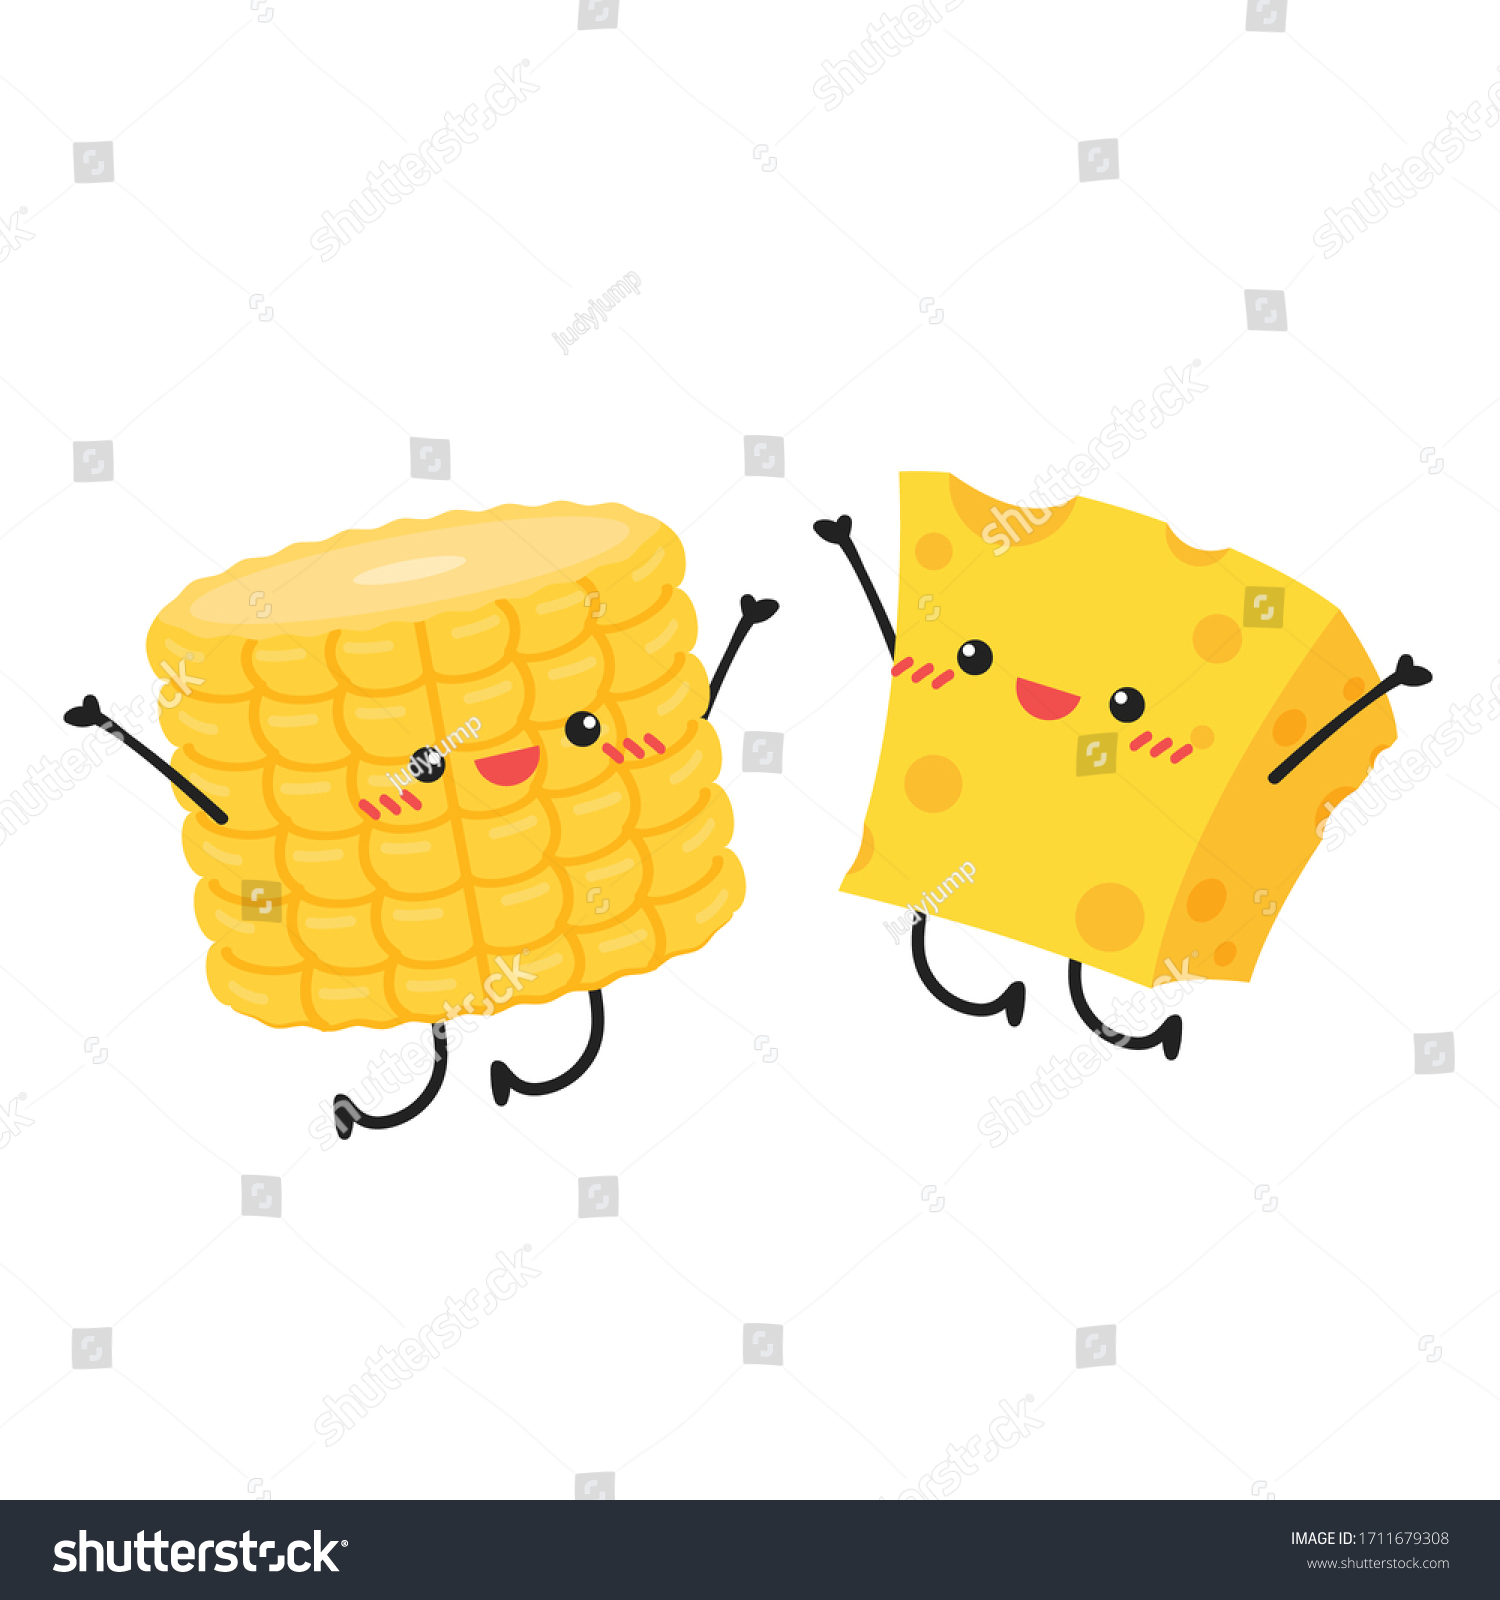 SVG of Corn and Cheese vector. Corn and Cheese character design. Corn on white background. svg